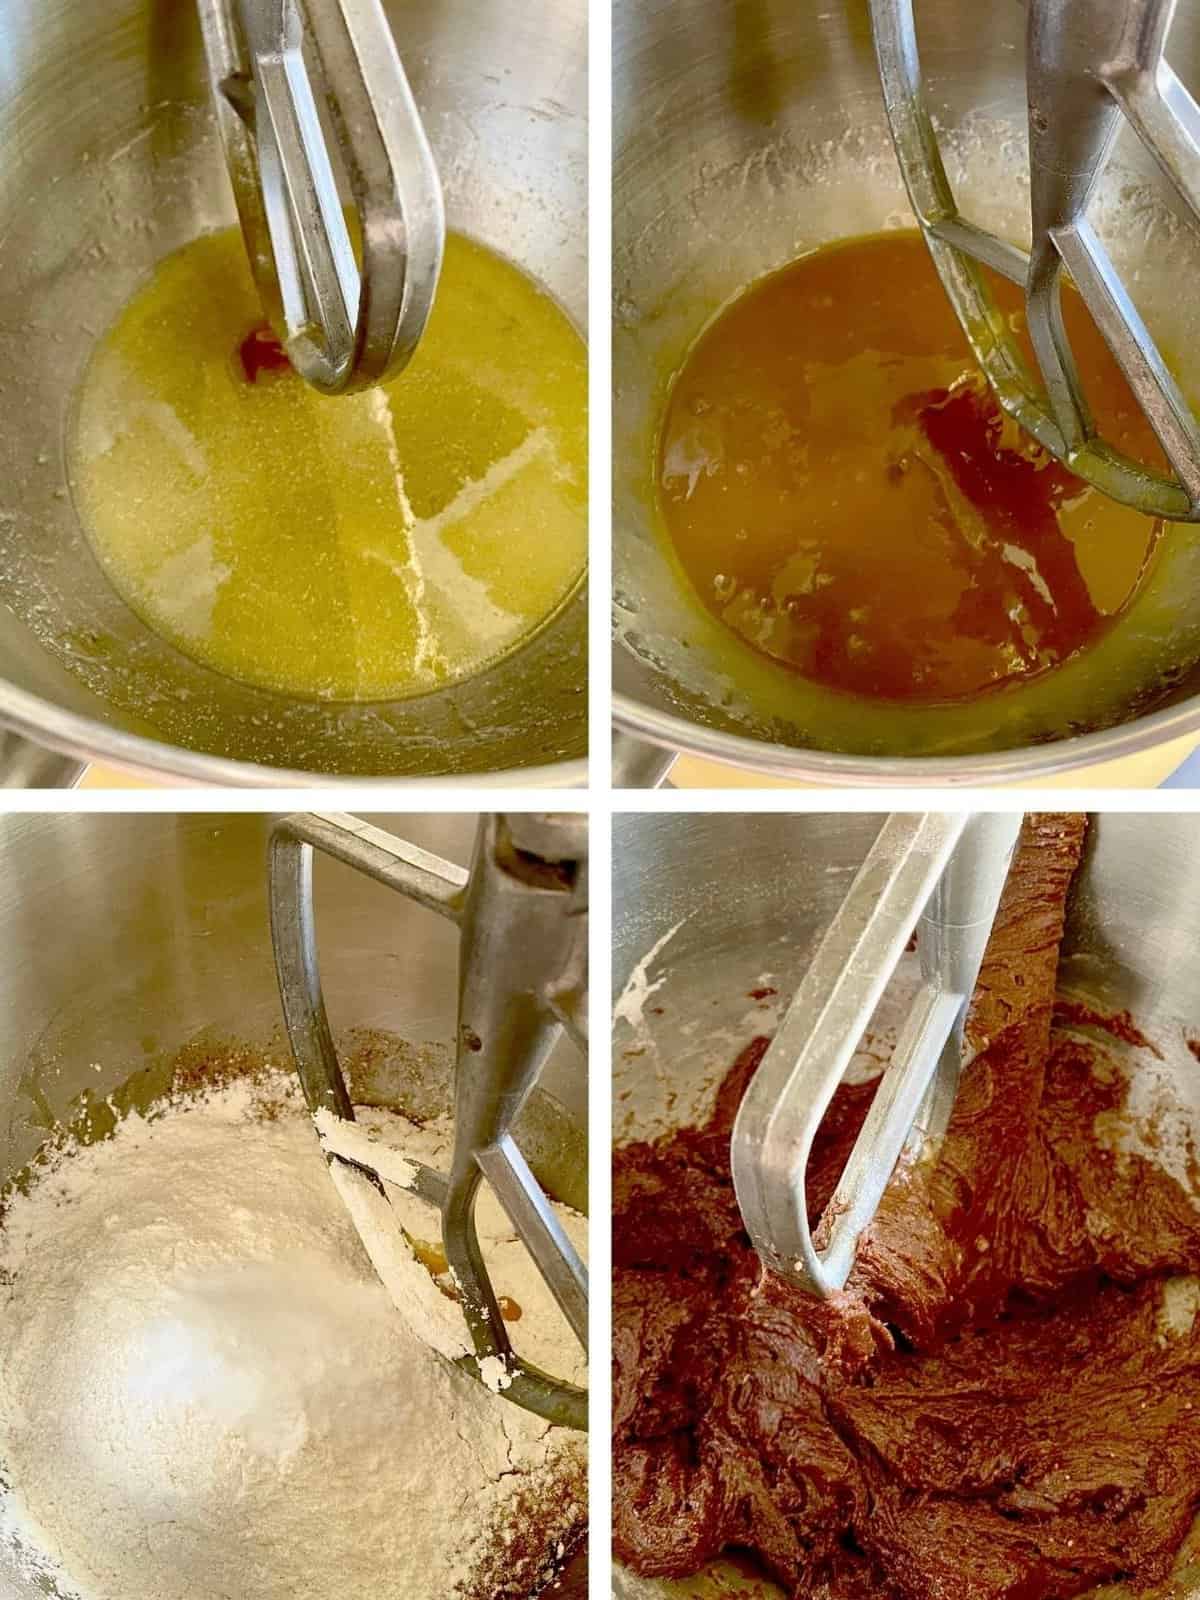 Four images showing the mixing process of the cookie dough